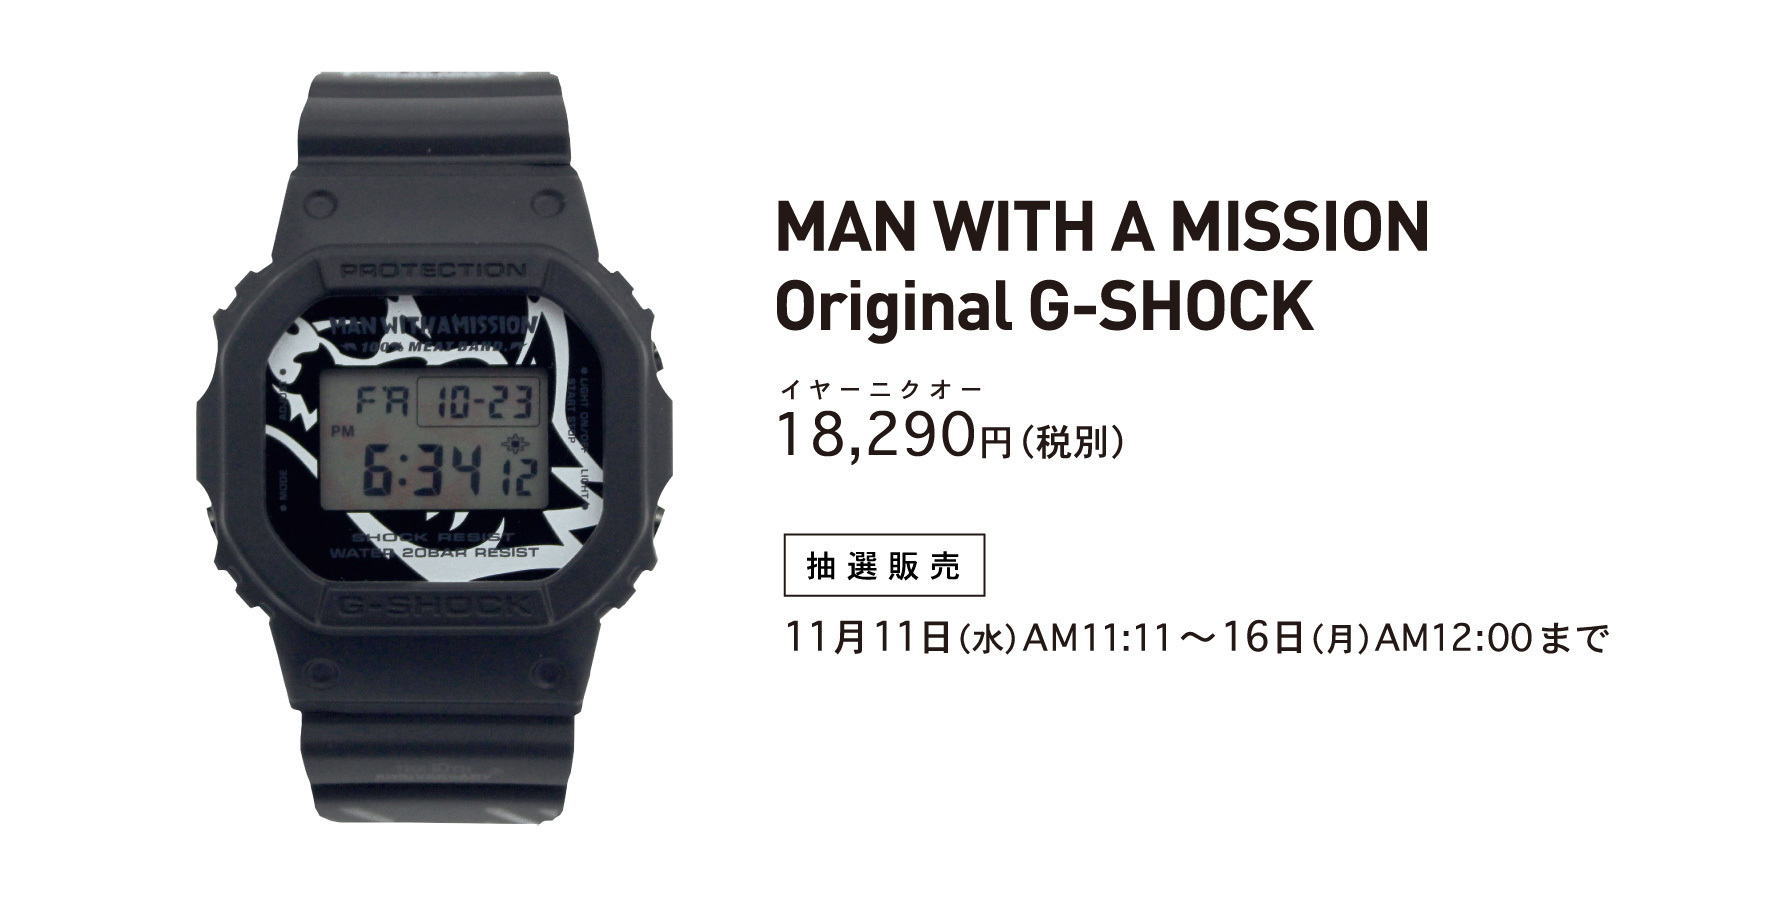 MAN WITH A MISSION Original G-SHOCK